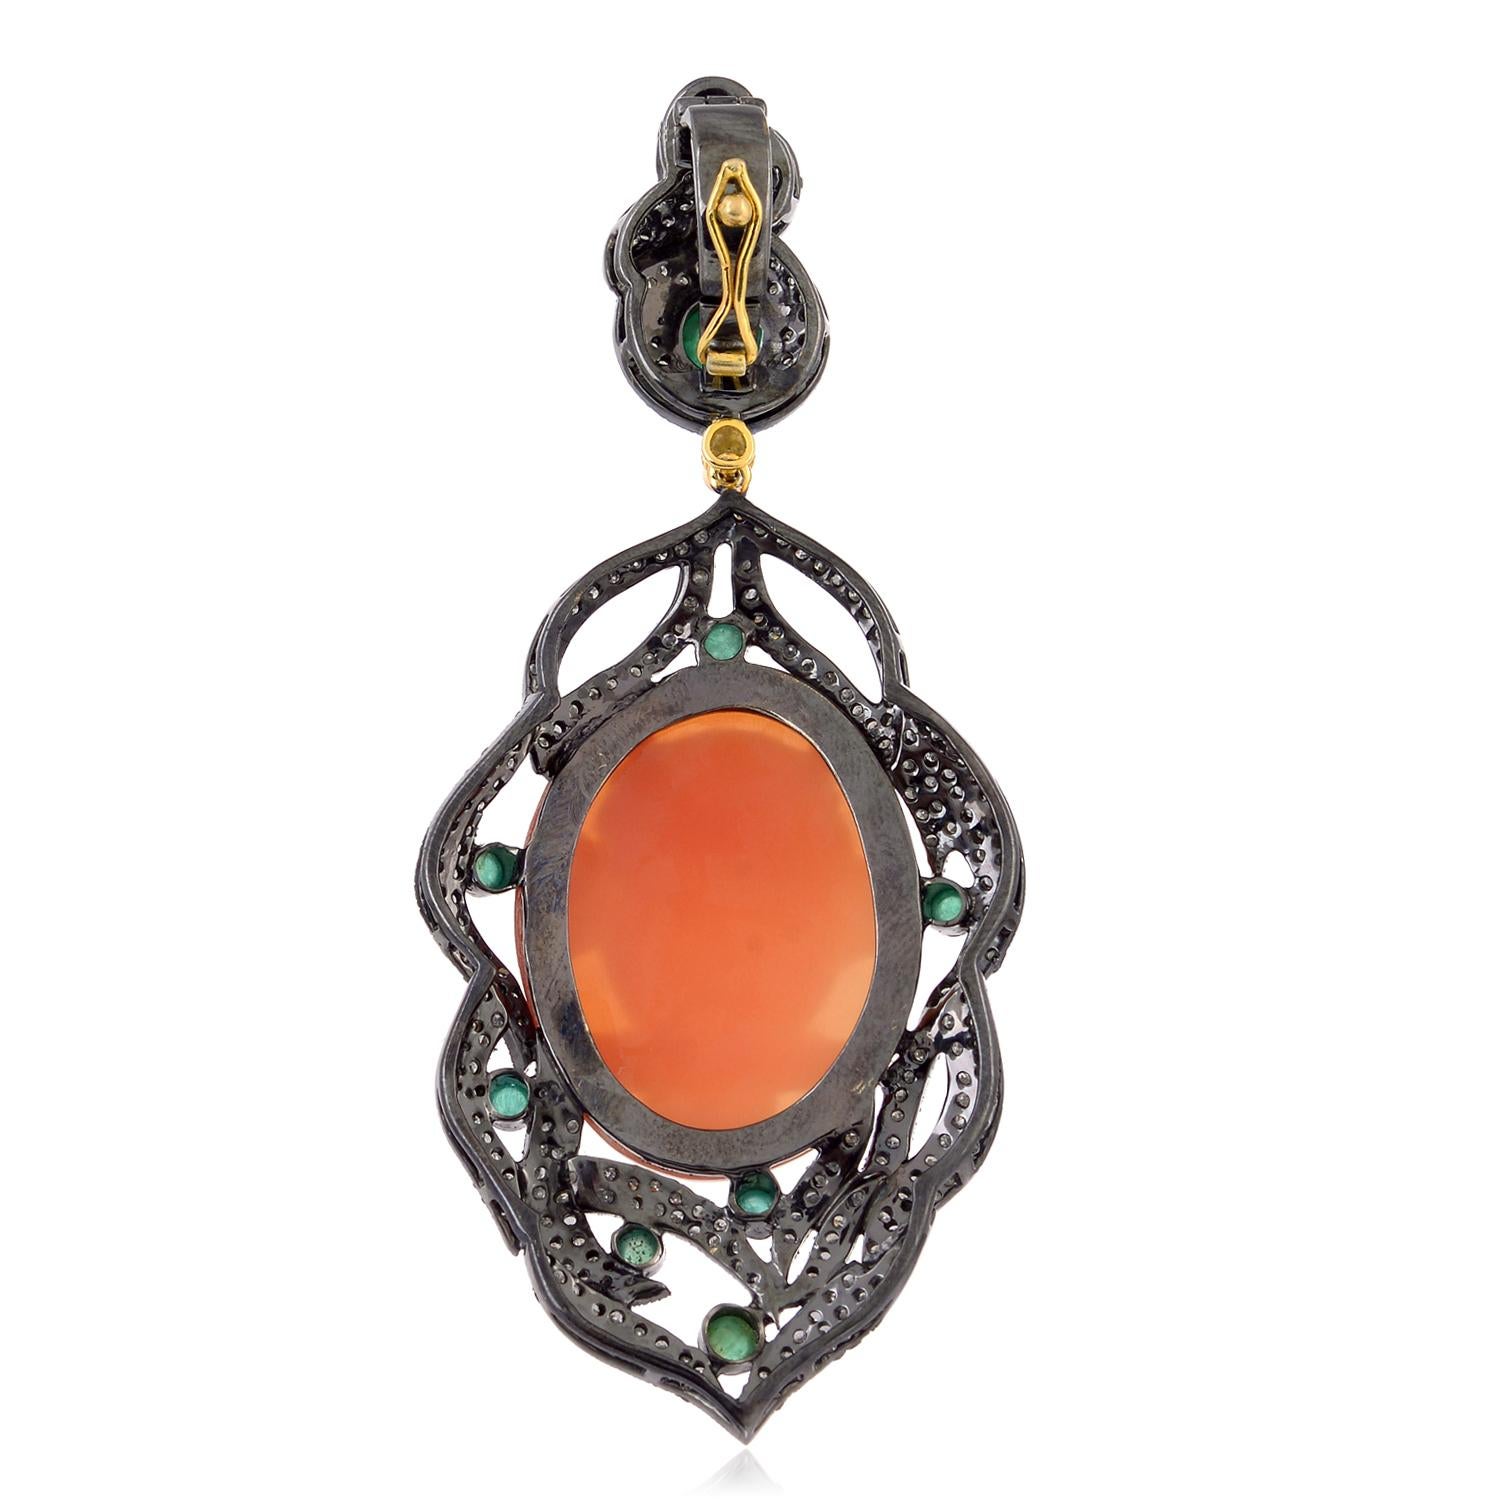 Art Deco Carved Shell Cameo Pendant With Emerald & Pave Diamonds Made in Gold & Silver For Sale